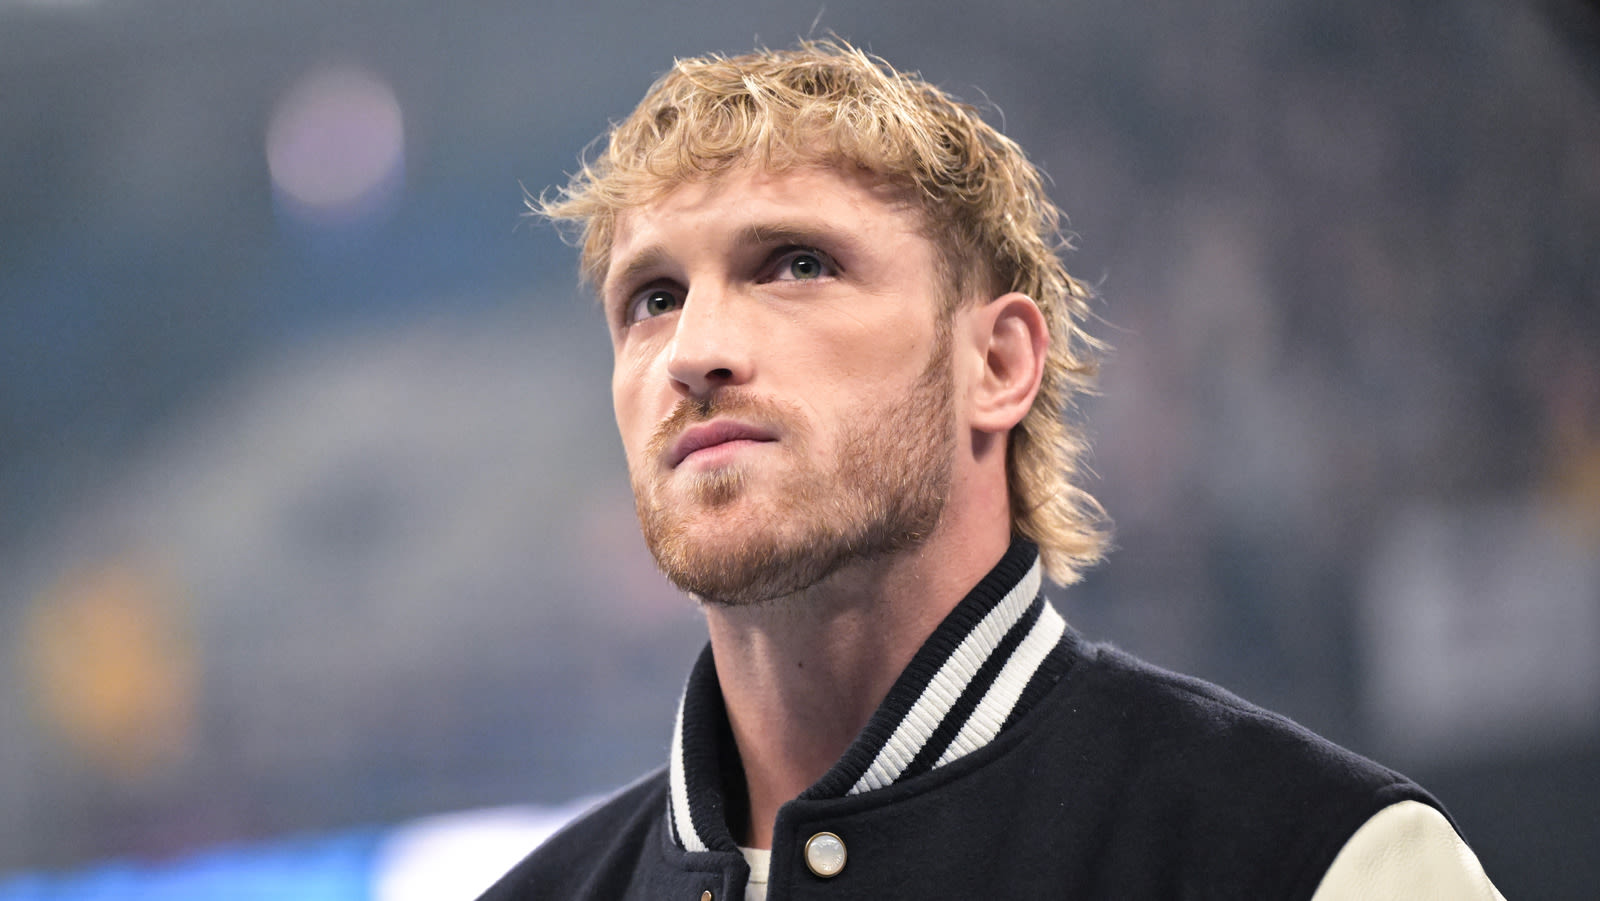 WWE Star Logan Paul Makes Controversial Remarks About Olympic Boxer Imane Khelif - Wrestling Inc.